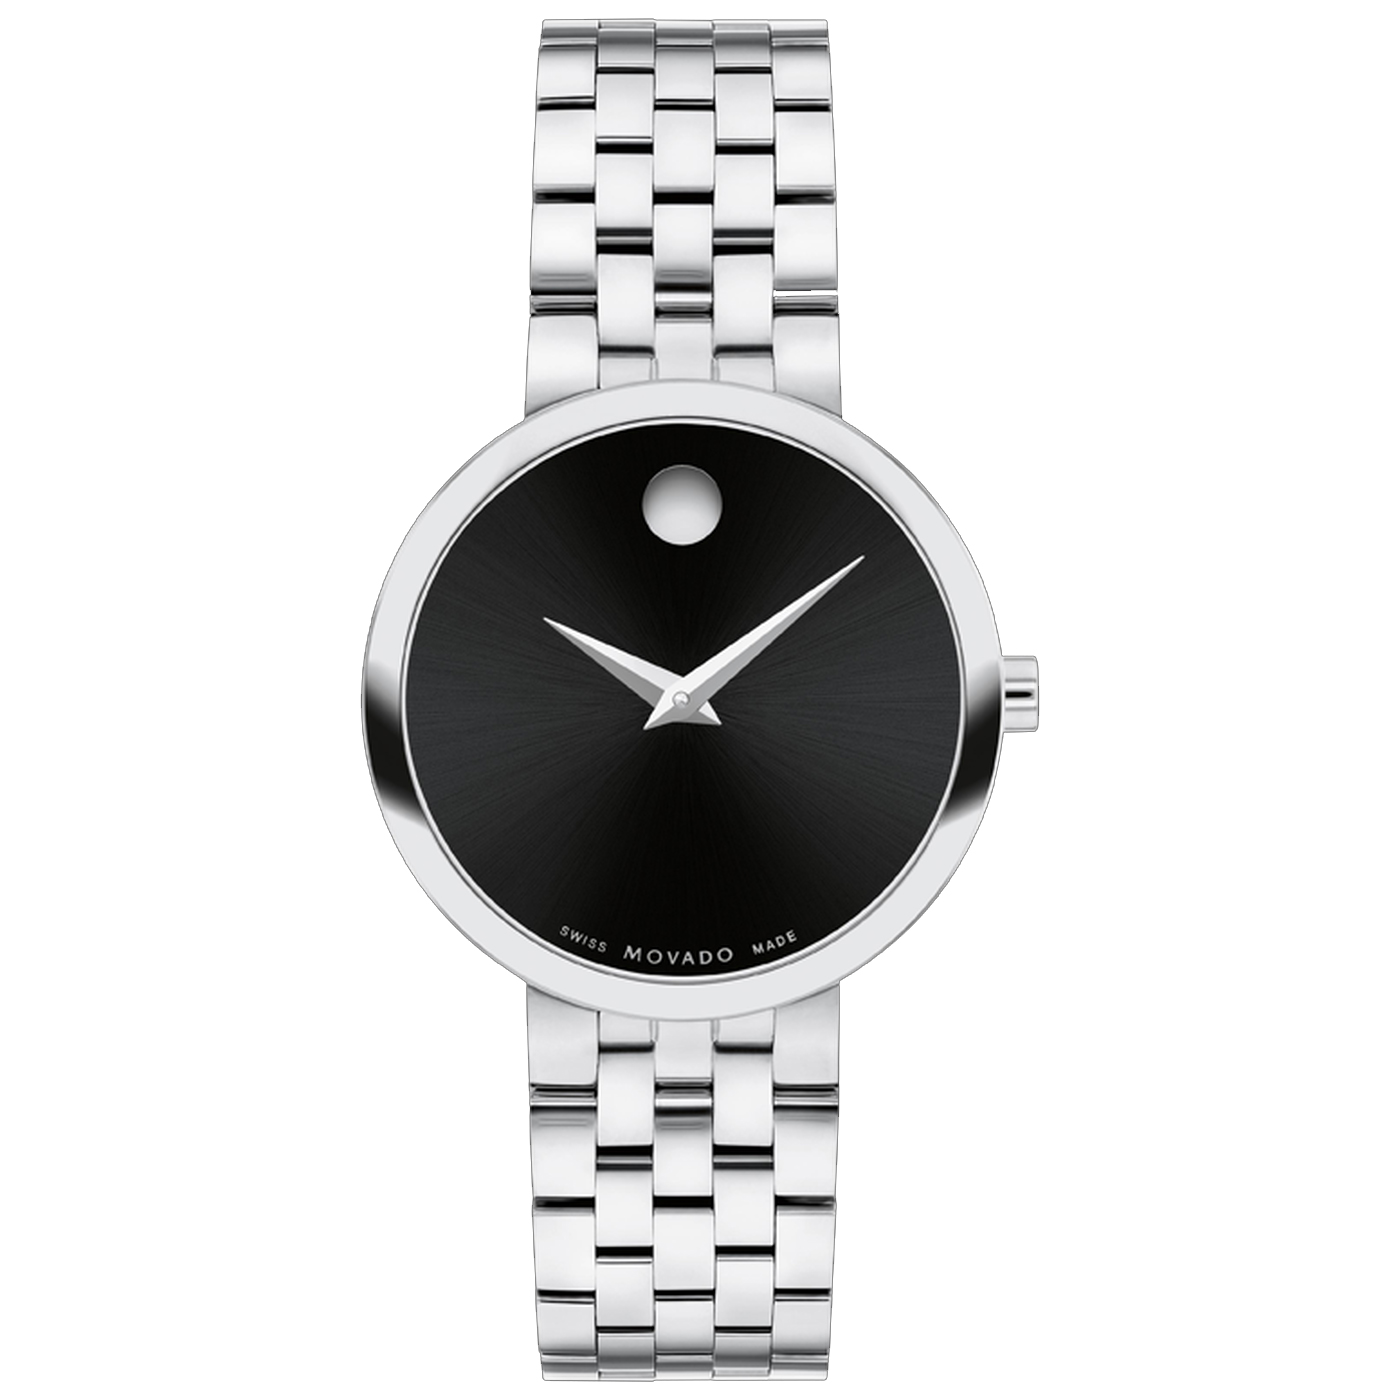 Museum Classic Black Dial Stainless Steel Watch 29.5mm - 0 - Movado 607813